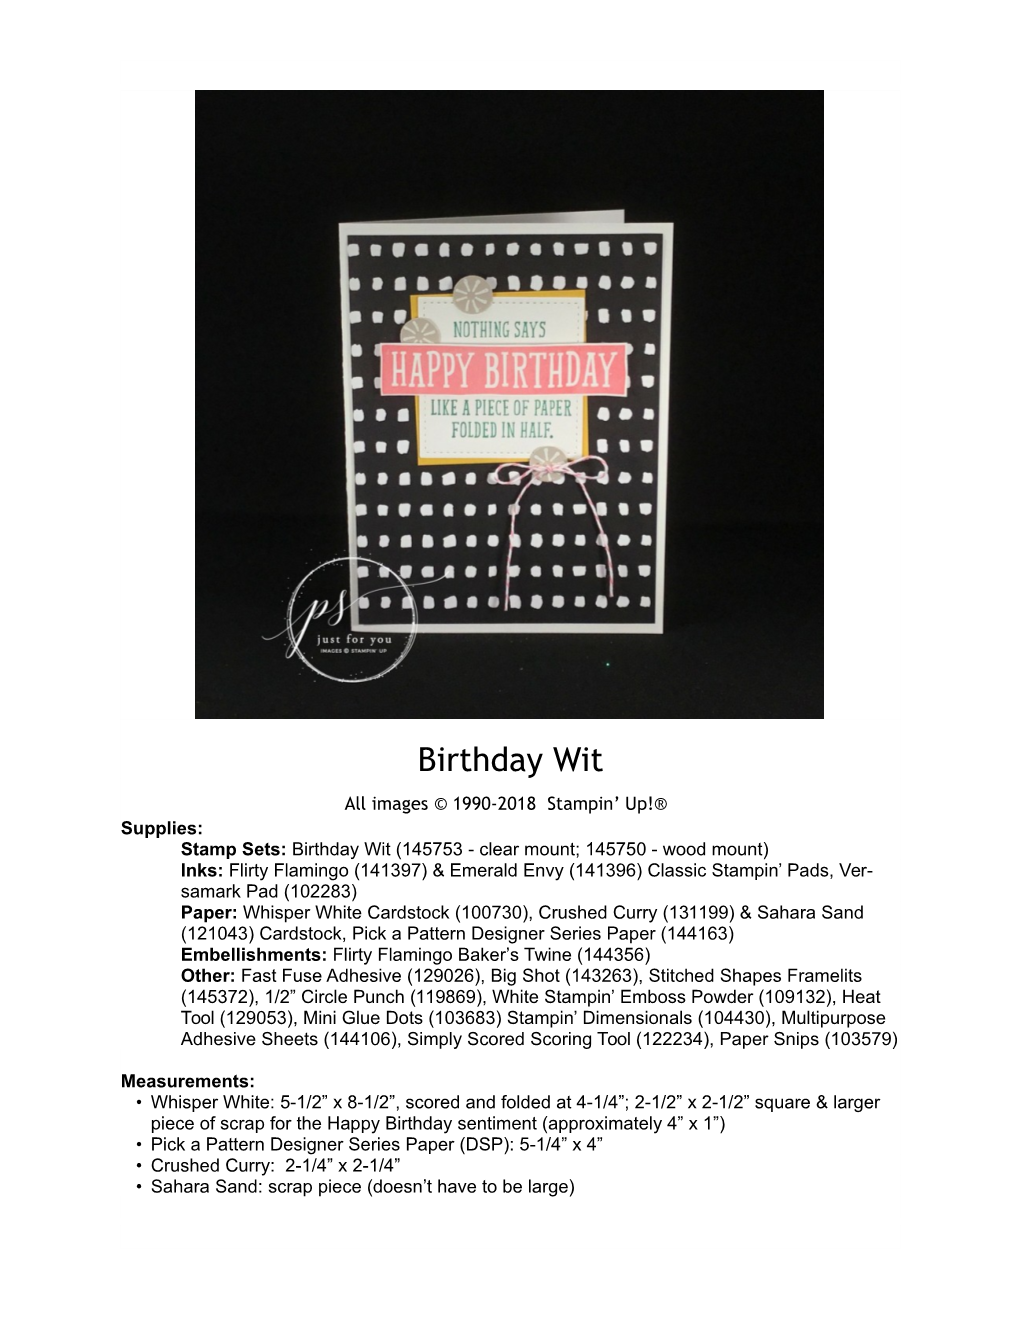 Stamp Sets:Birthday Wit (145753 - Clear Mount; 145750 - Wood Mount)